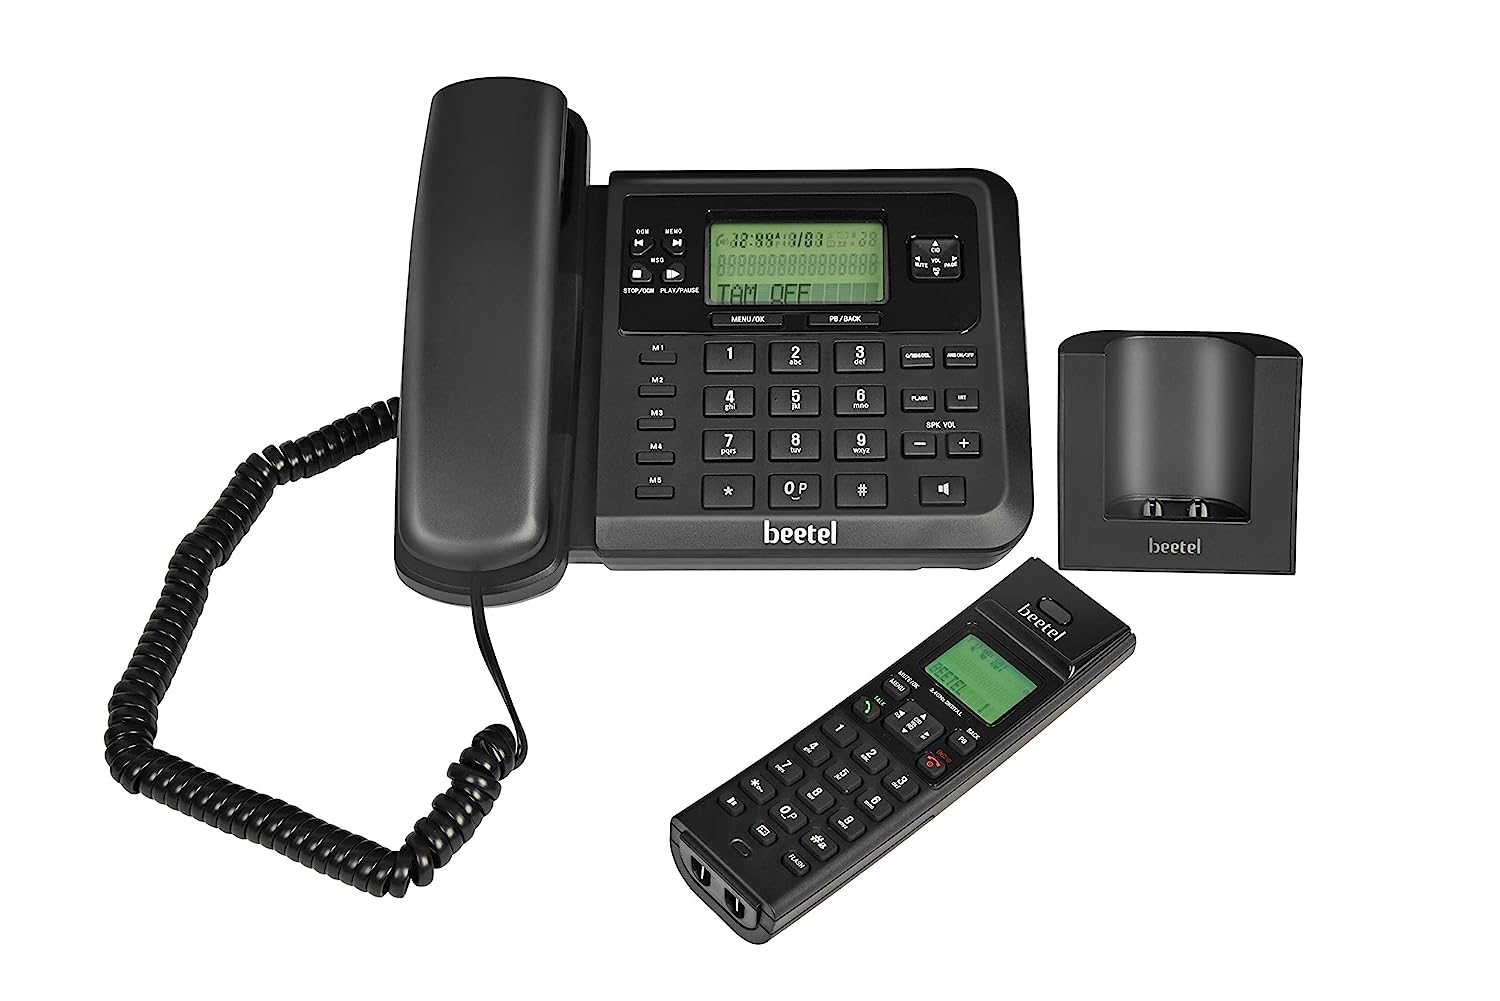 Beetel X78 2.4GHz Cordless Combo, with 2 Way Speaker Phone for Both Base and Handset, 3 Way Call conferencing, 8hrs Talk Time and 4 Days stand by, Stylish & Sturdy for Both Home and Office (X78 Black)